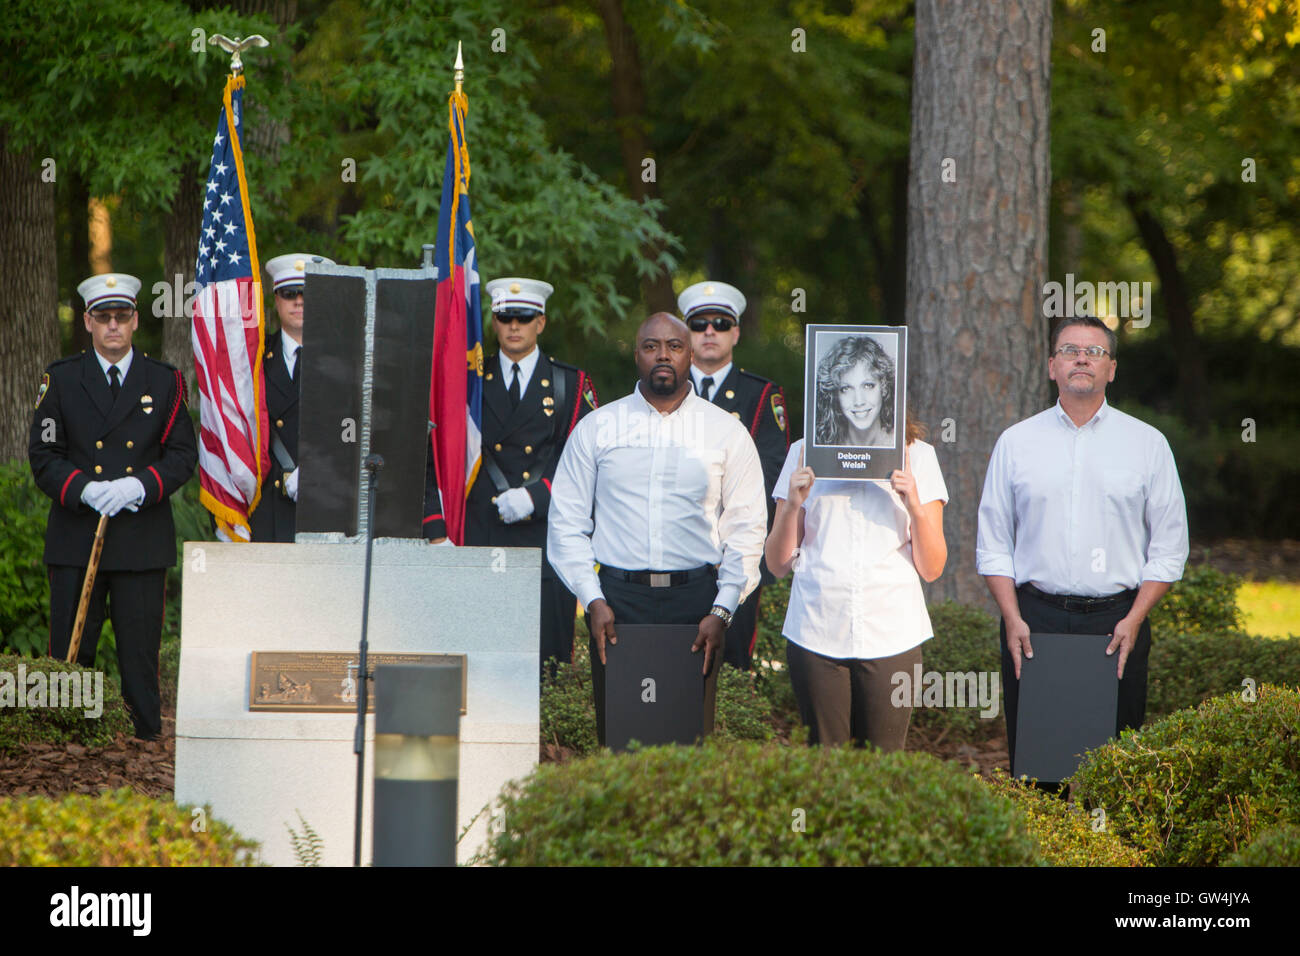 Arlington, Virginia, USA. 11th September, 2016. Members of the Onslow Civic Affairs Committee hold photos of those killed in the 9/11 terror attacks during a remembrance ceremony commemorating the 15th anniversary at the Lejeune Memorial Gardens September 11, 2016 in Jacksonville, N.C. Credit:  Planetpix/Alamy Live News Stock Photo